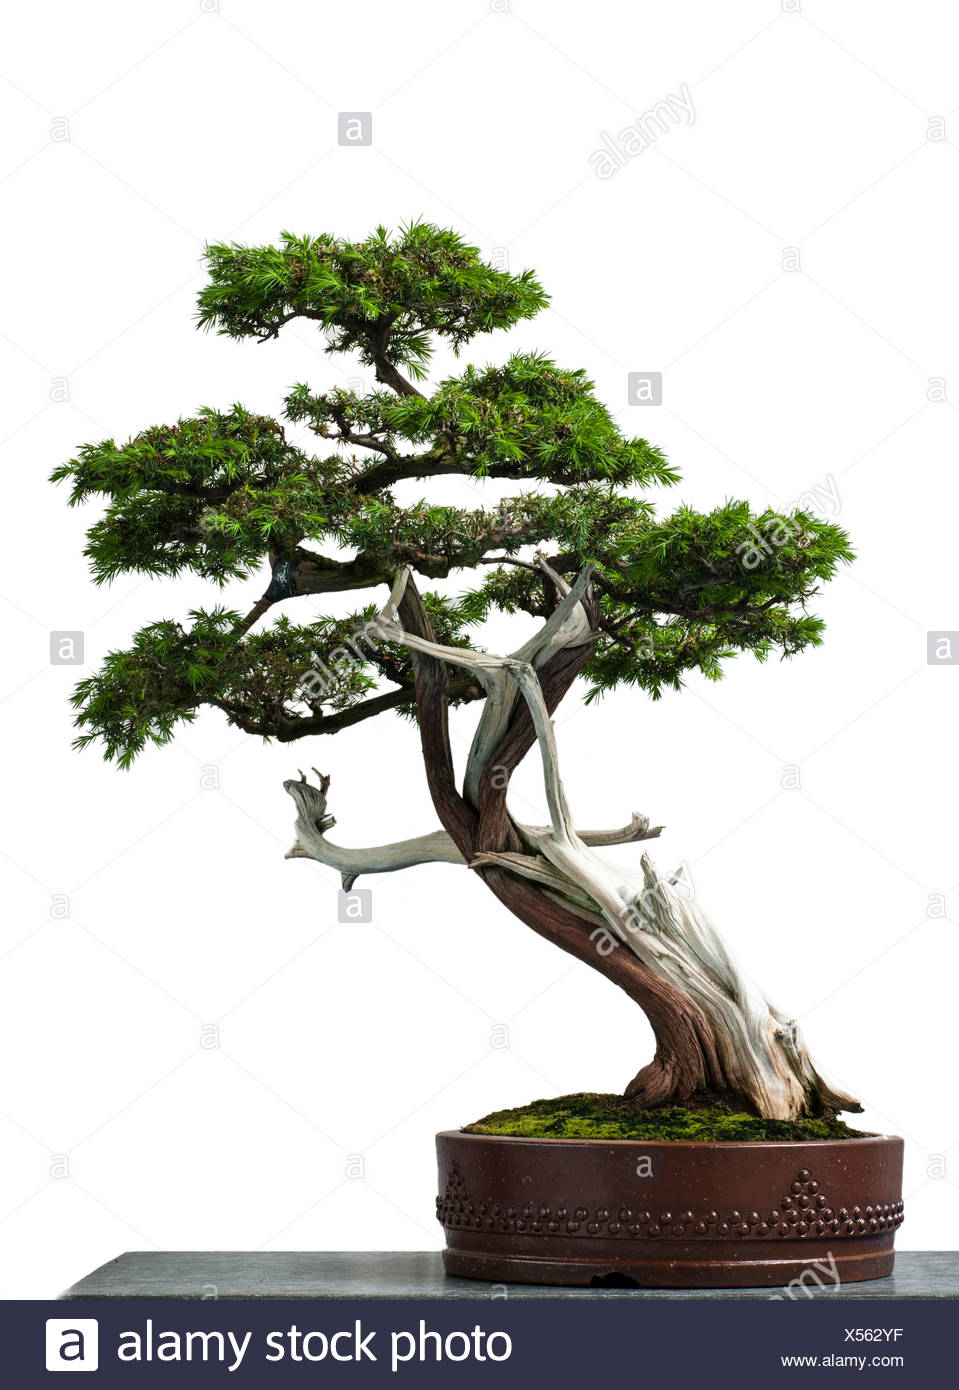 Cypress Bonsai Tree High Resolution Stock Photography And Images Alamy